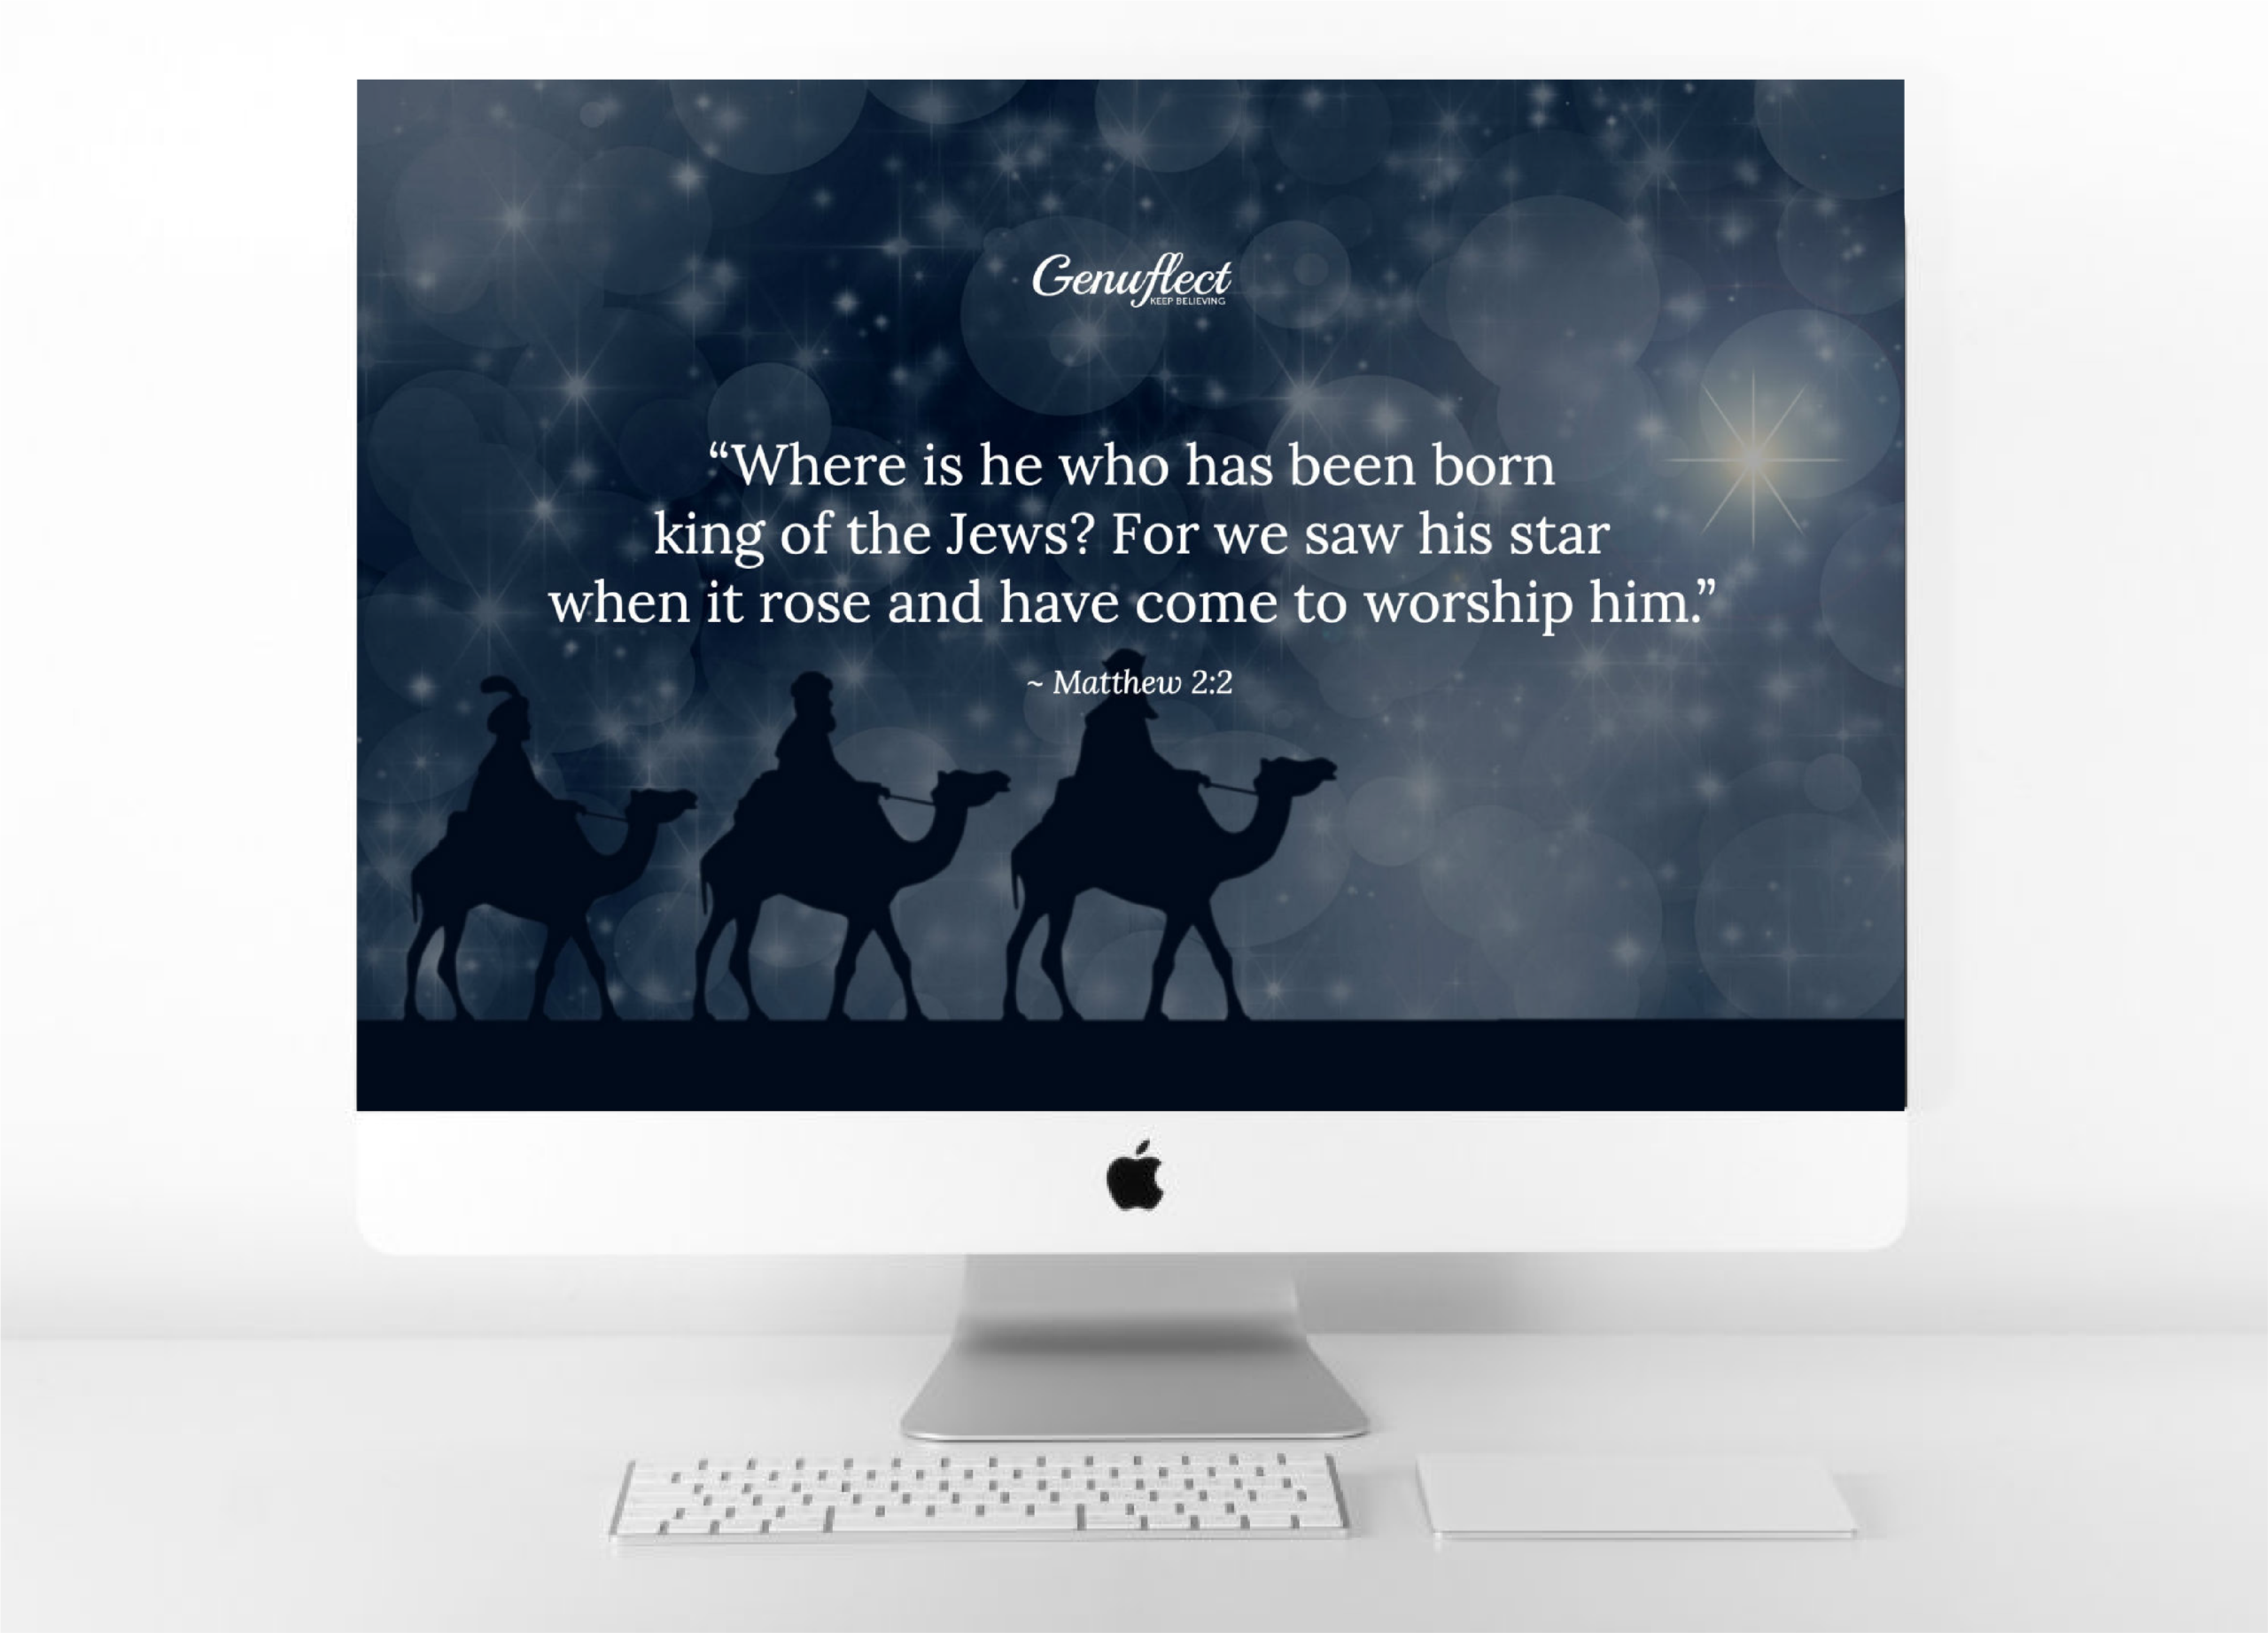 Genuflect .net-Image of three magi on camels following the Bethlehem star as background of a computer